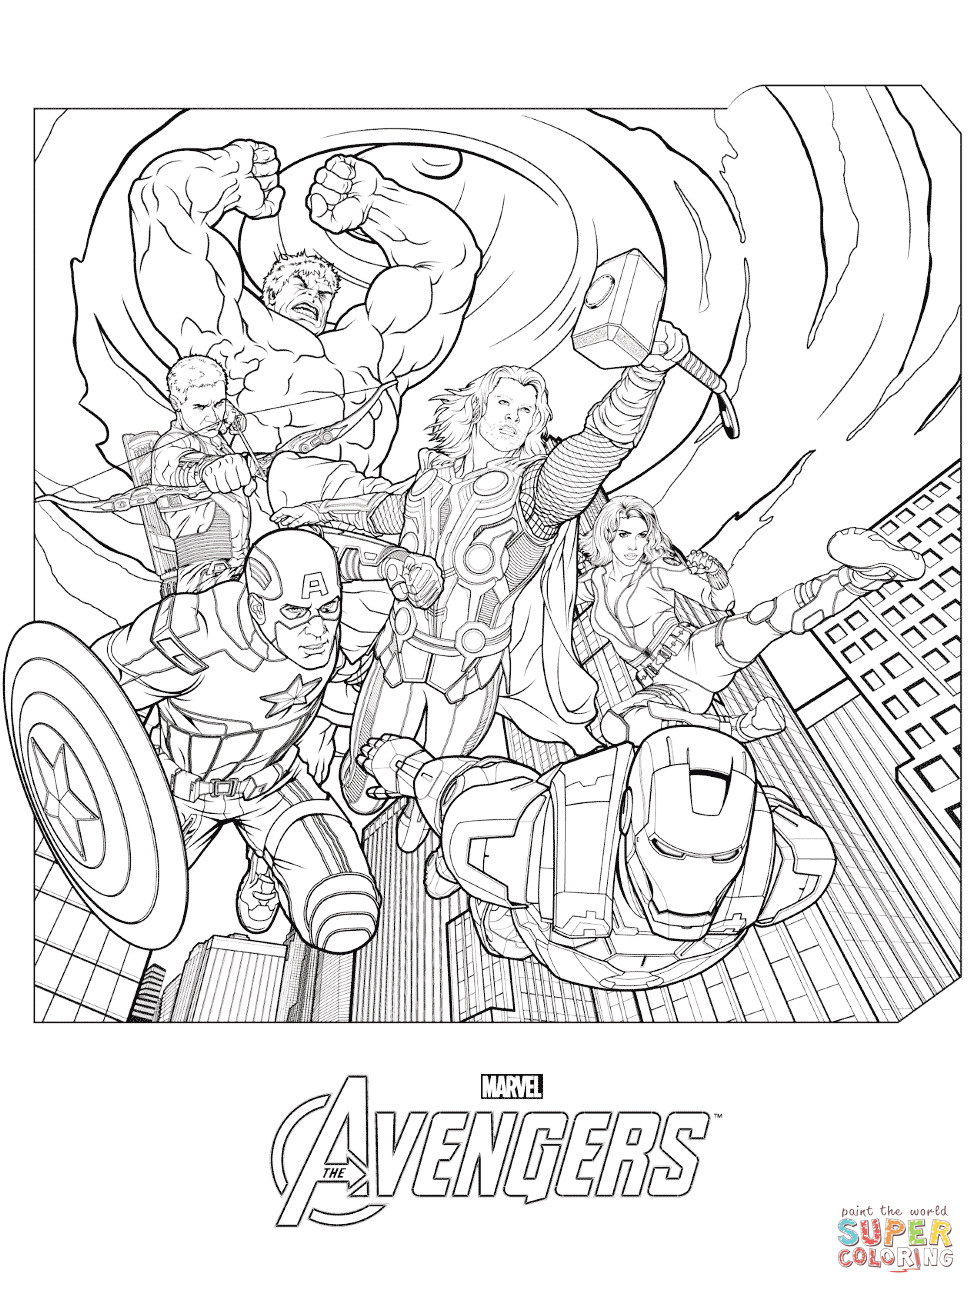 Avengers Coloring Pages Printable
 Marvel Avengers coloring page